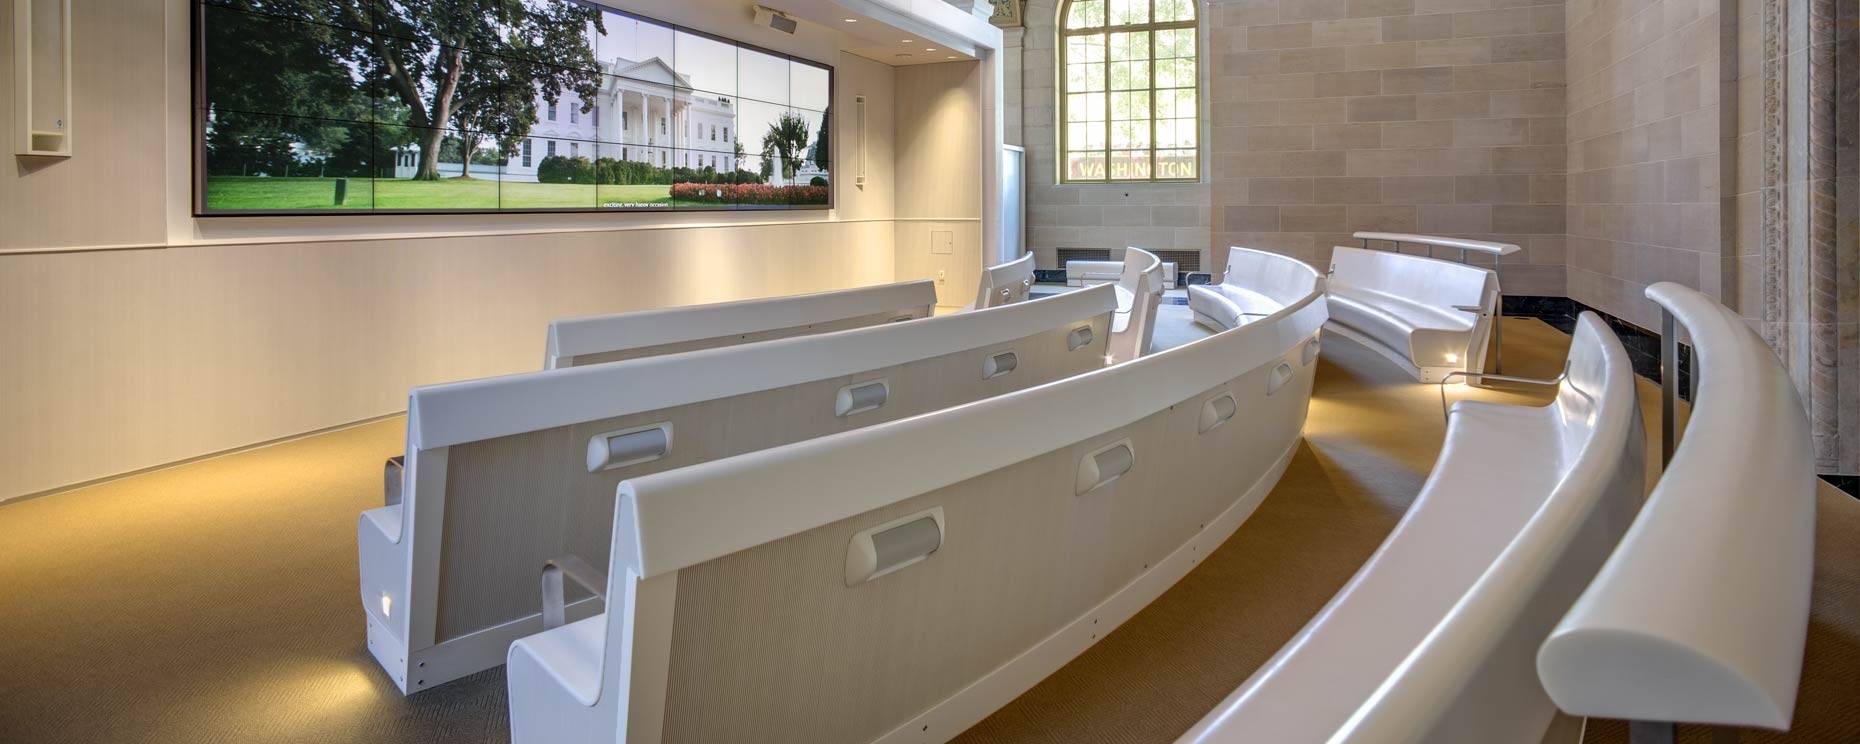 White House Visitors Center, Washington D.C.. Thermoformed curved benches

Material: Corian
Architecture: SmithGroupJJR